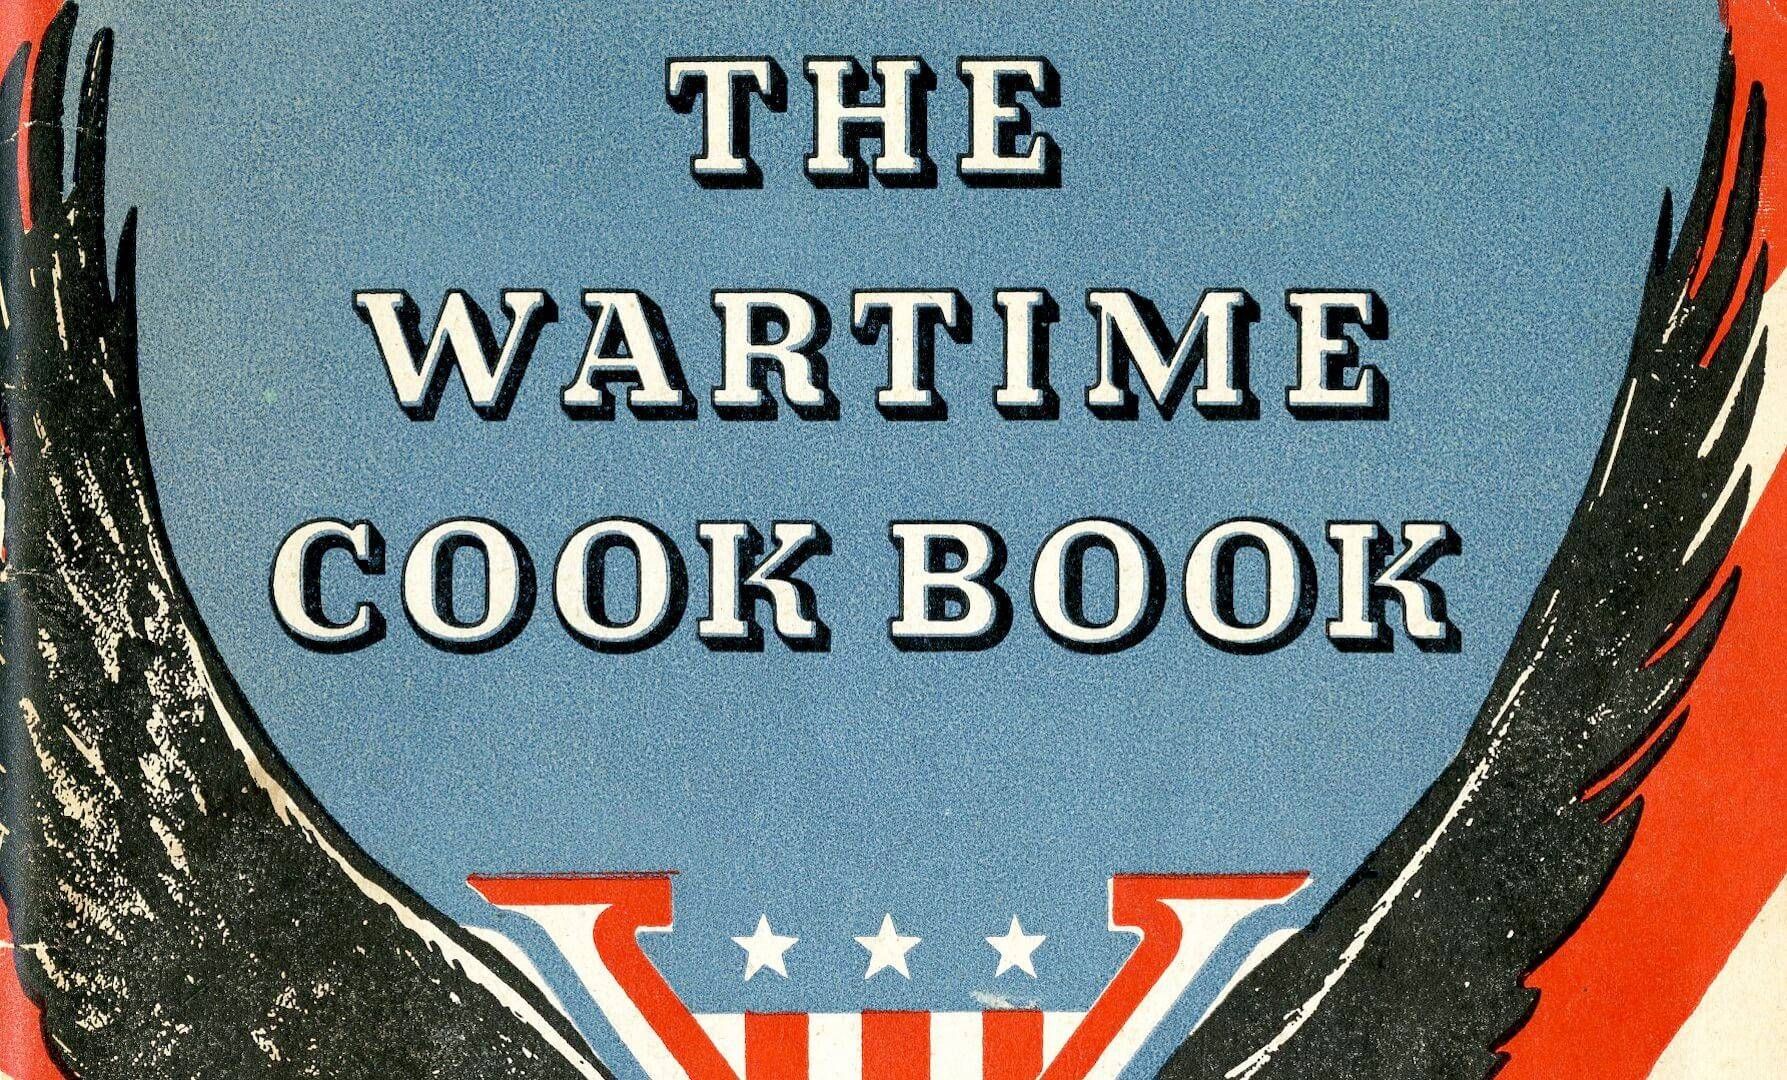 THE WARTIME COOK BOOK